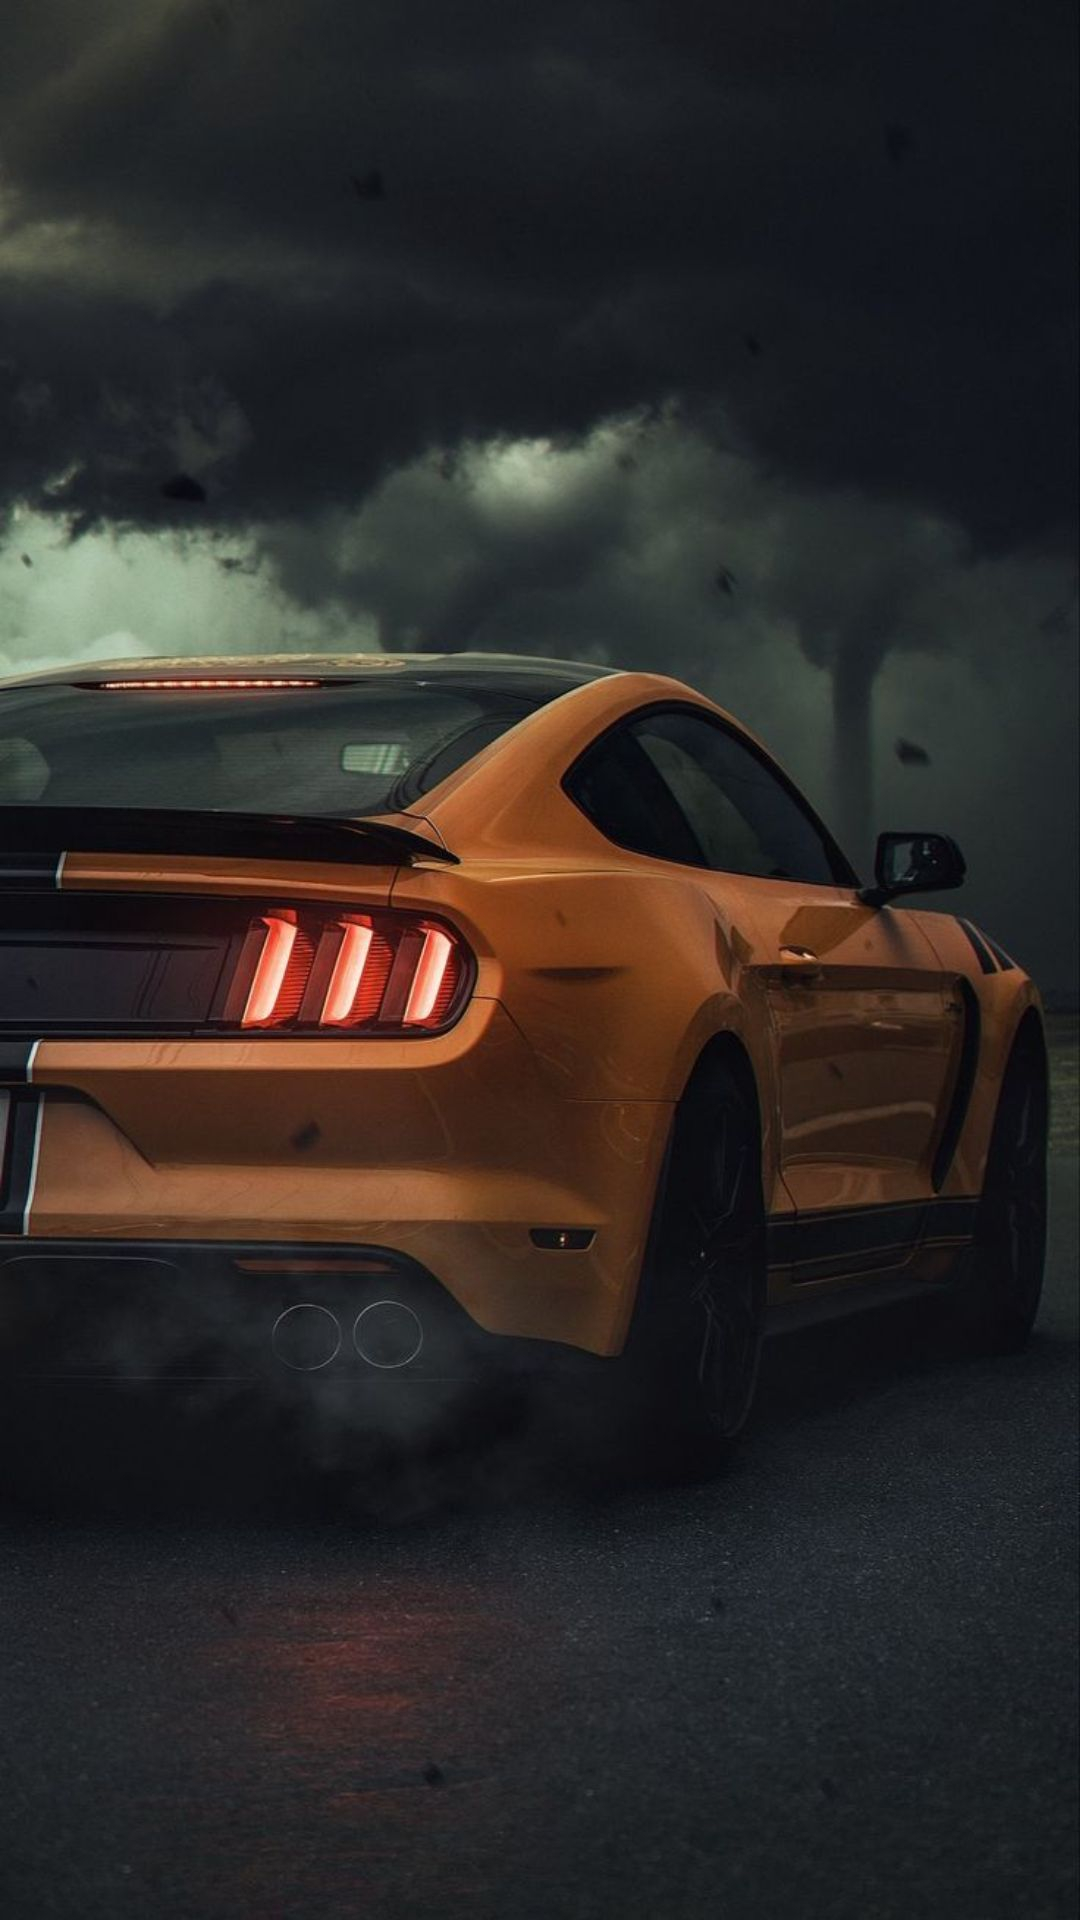 1080x1920 Ford Mustang Wallpapers Top 35 Best Ford Mustang Backgrounds Download